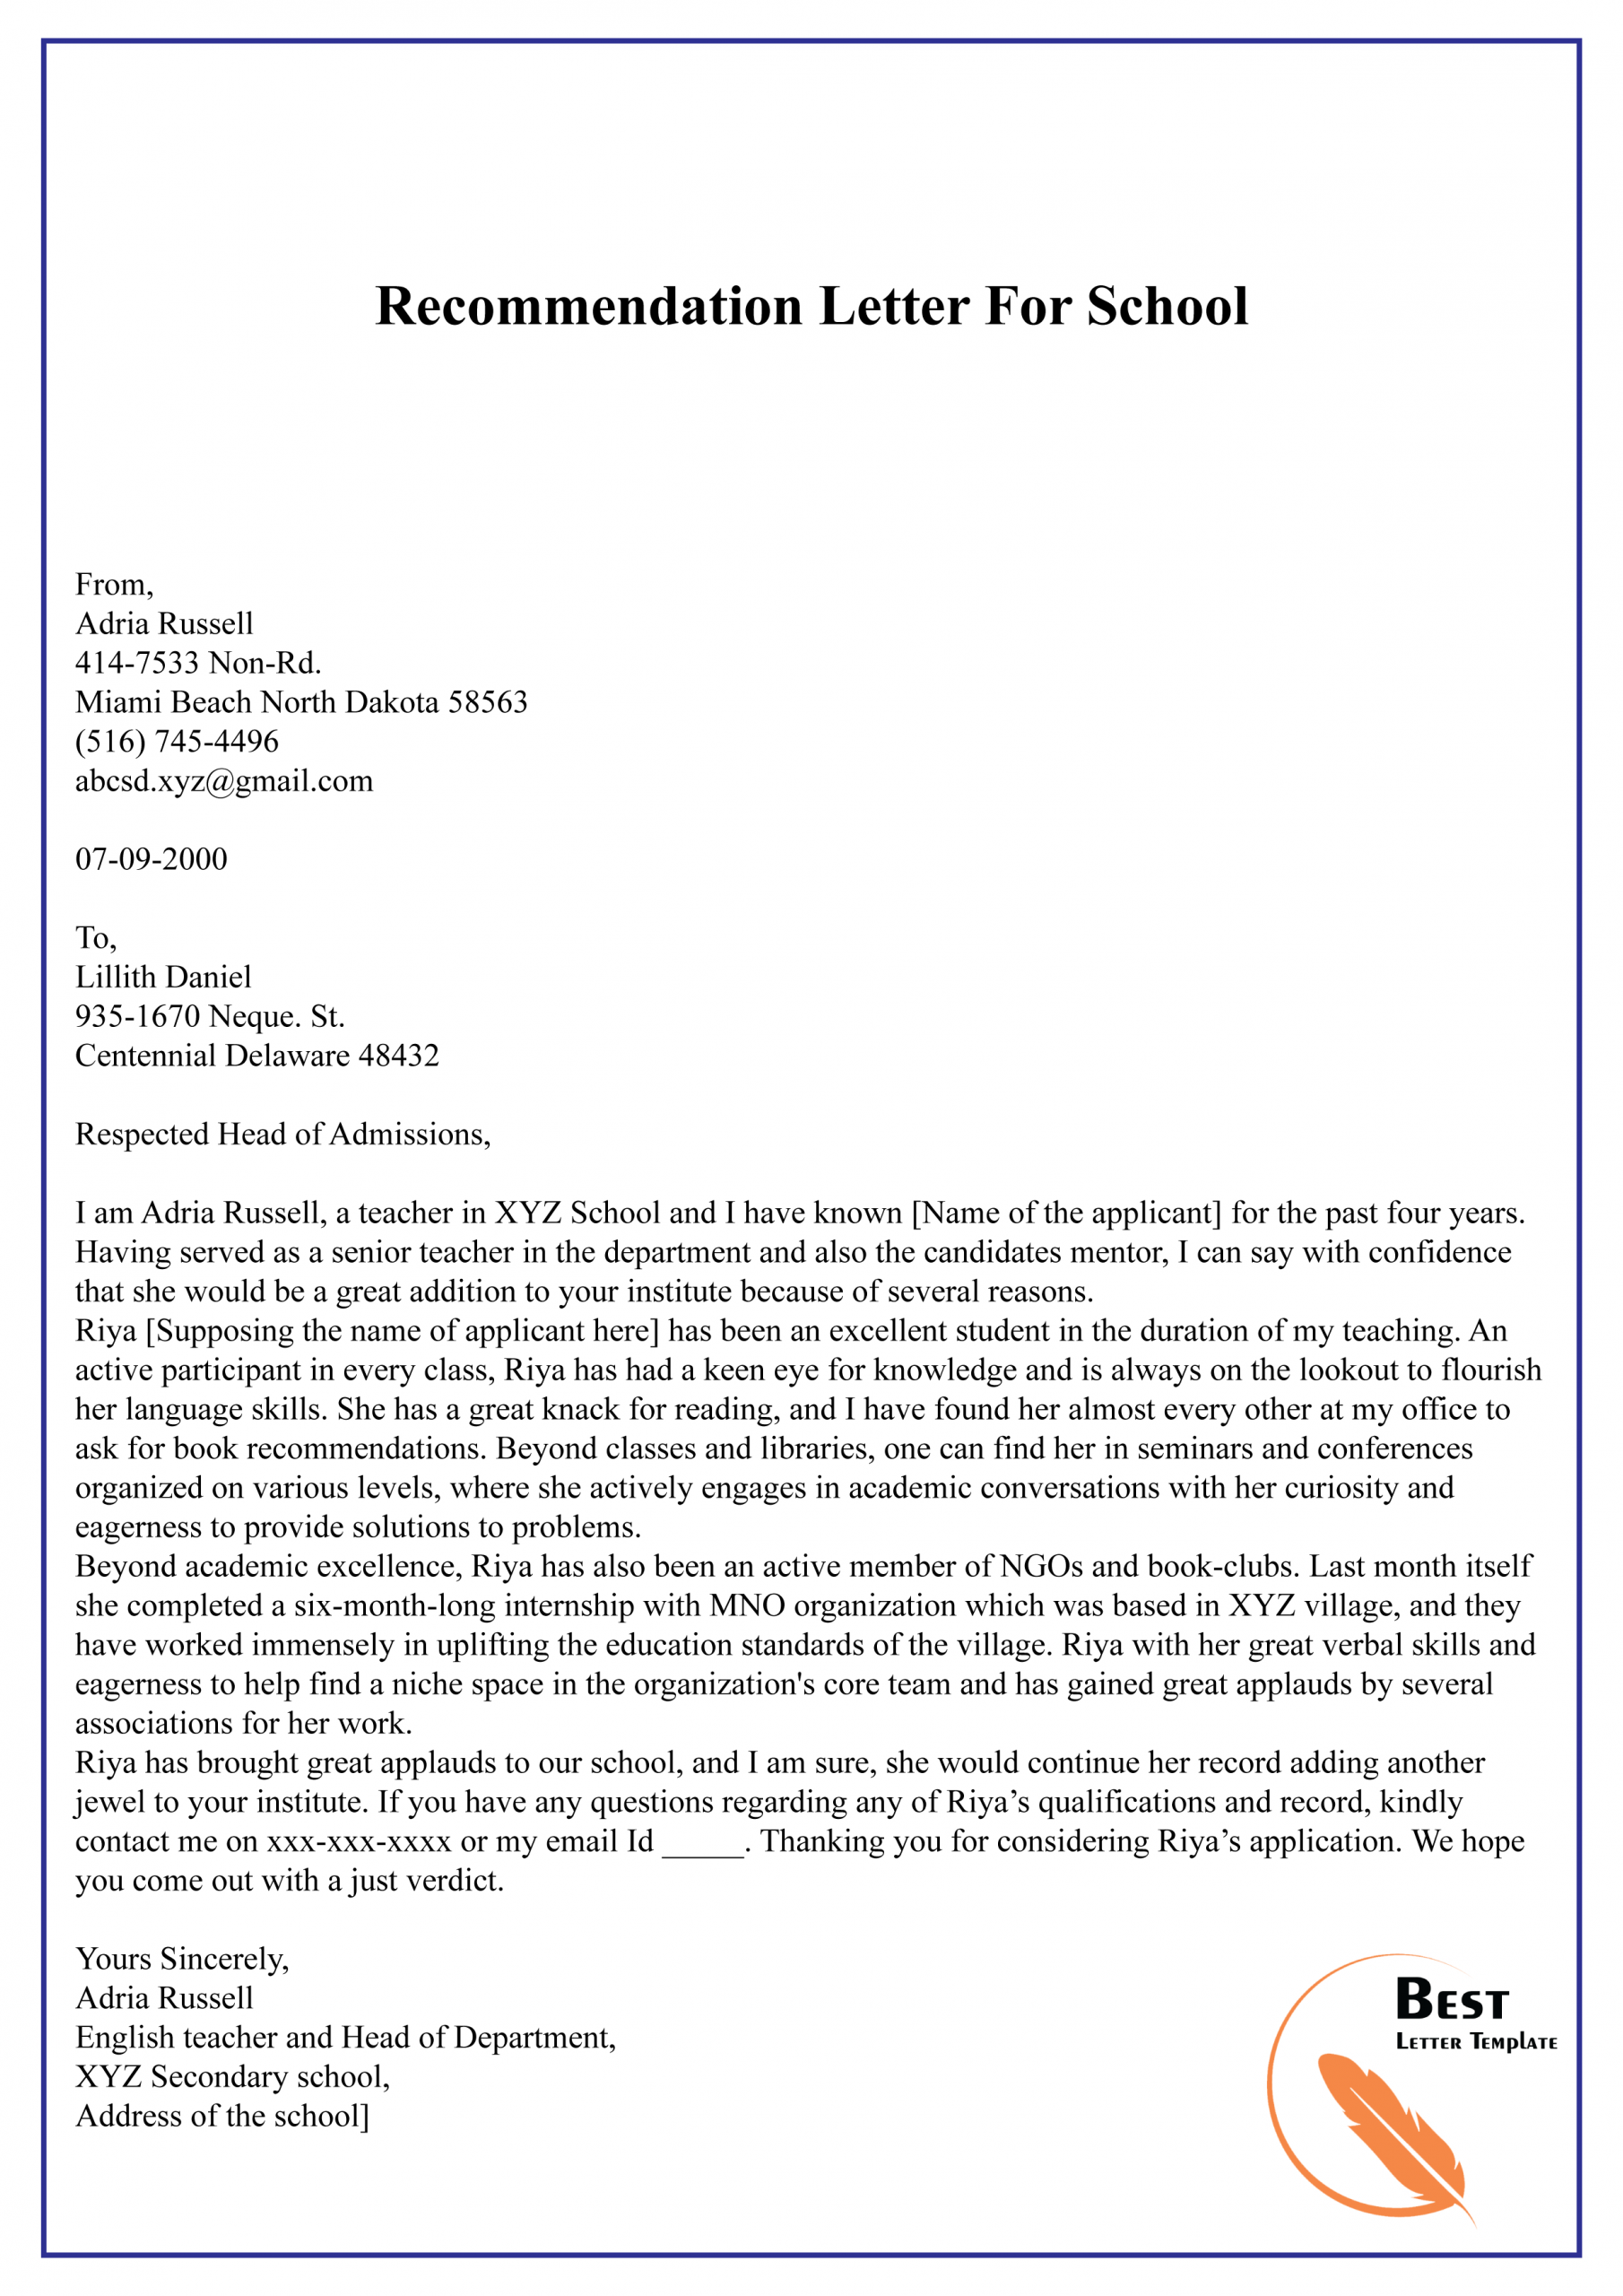 Recommendation Letter For School 01 Best Letter Template intended for dimensions 2480 X 3508